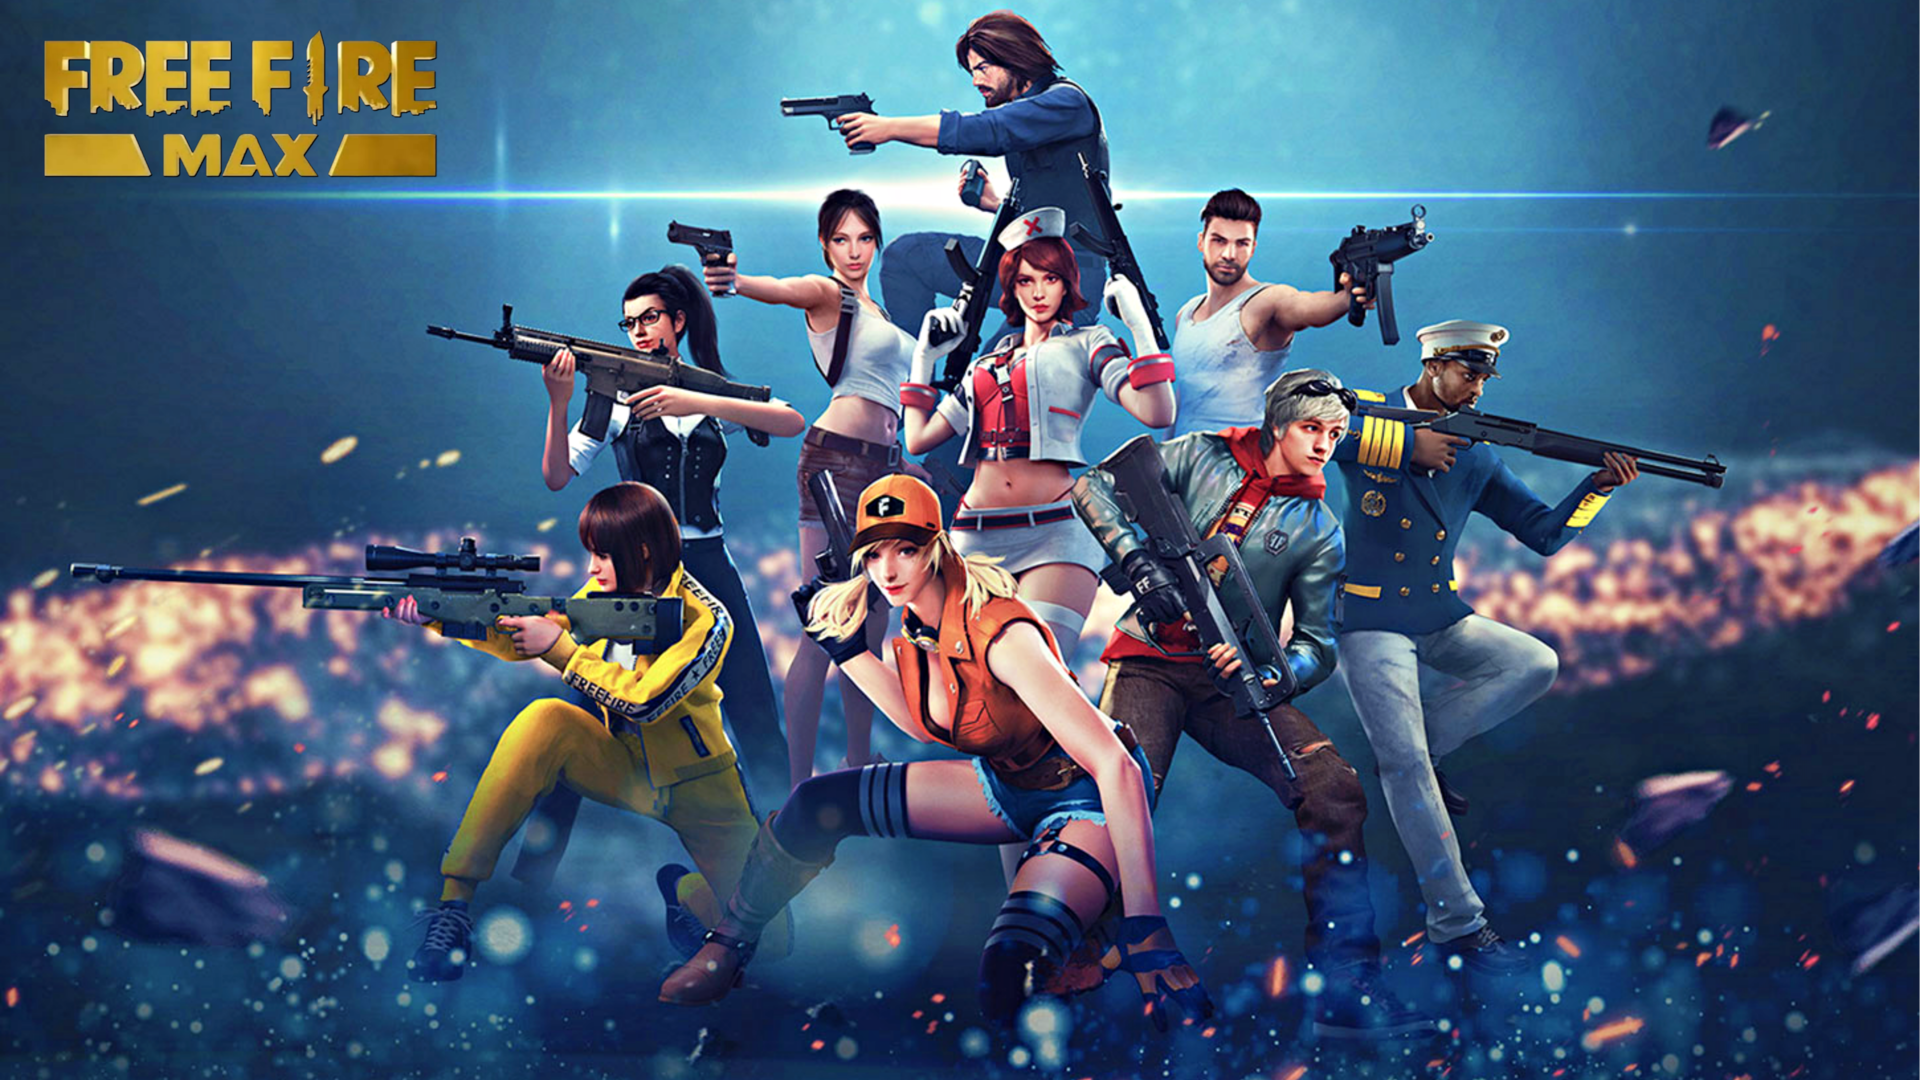 How to redeem Free Fire MAX codes for May 20